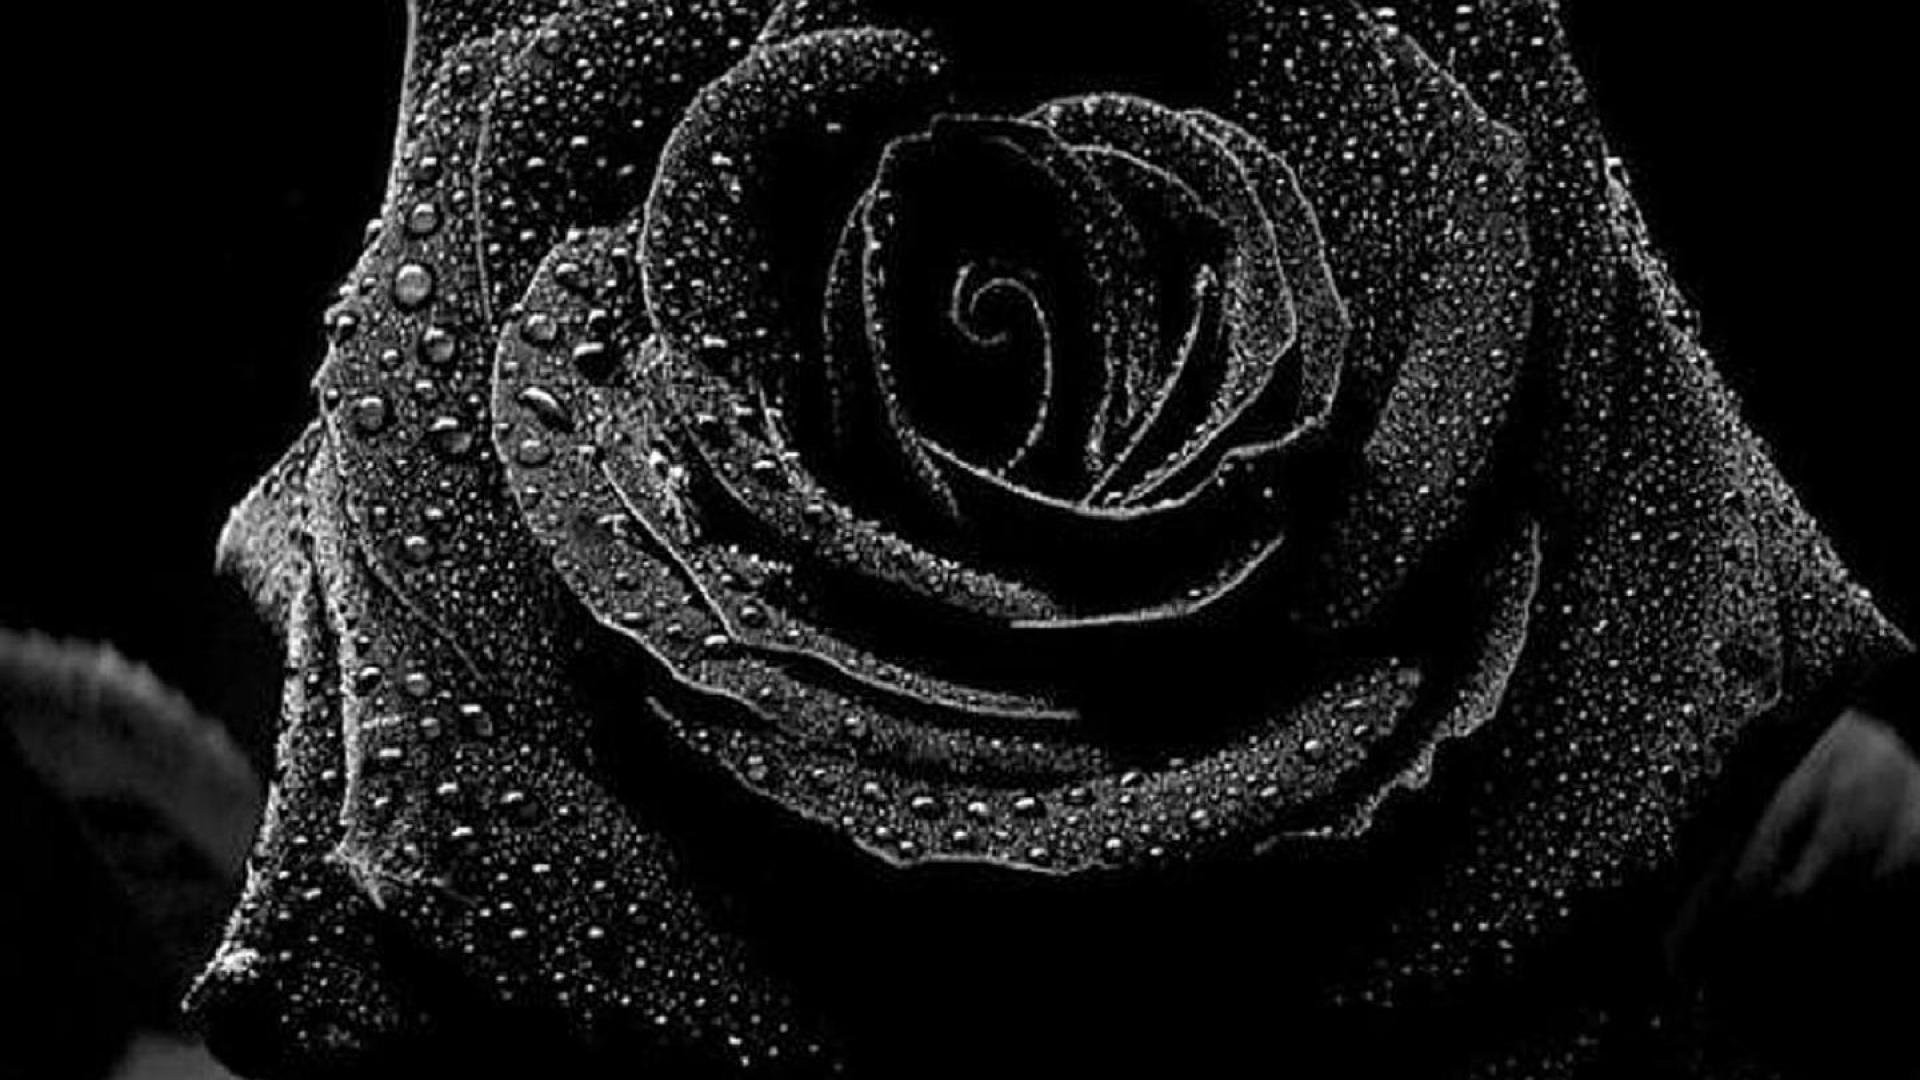 1920x1080 Black with Flowers Wallpaper New Beautiful Black Roses Hd Wallpapers –  Flowers Hd